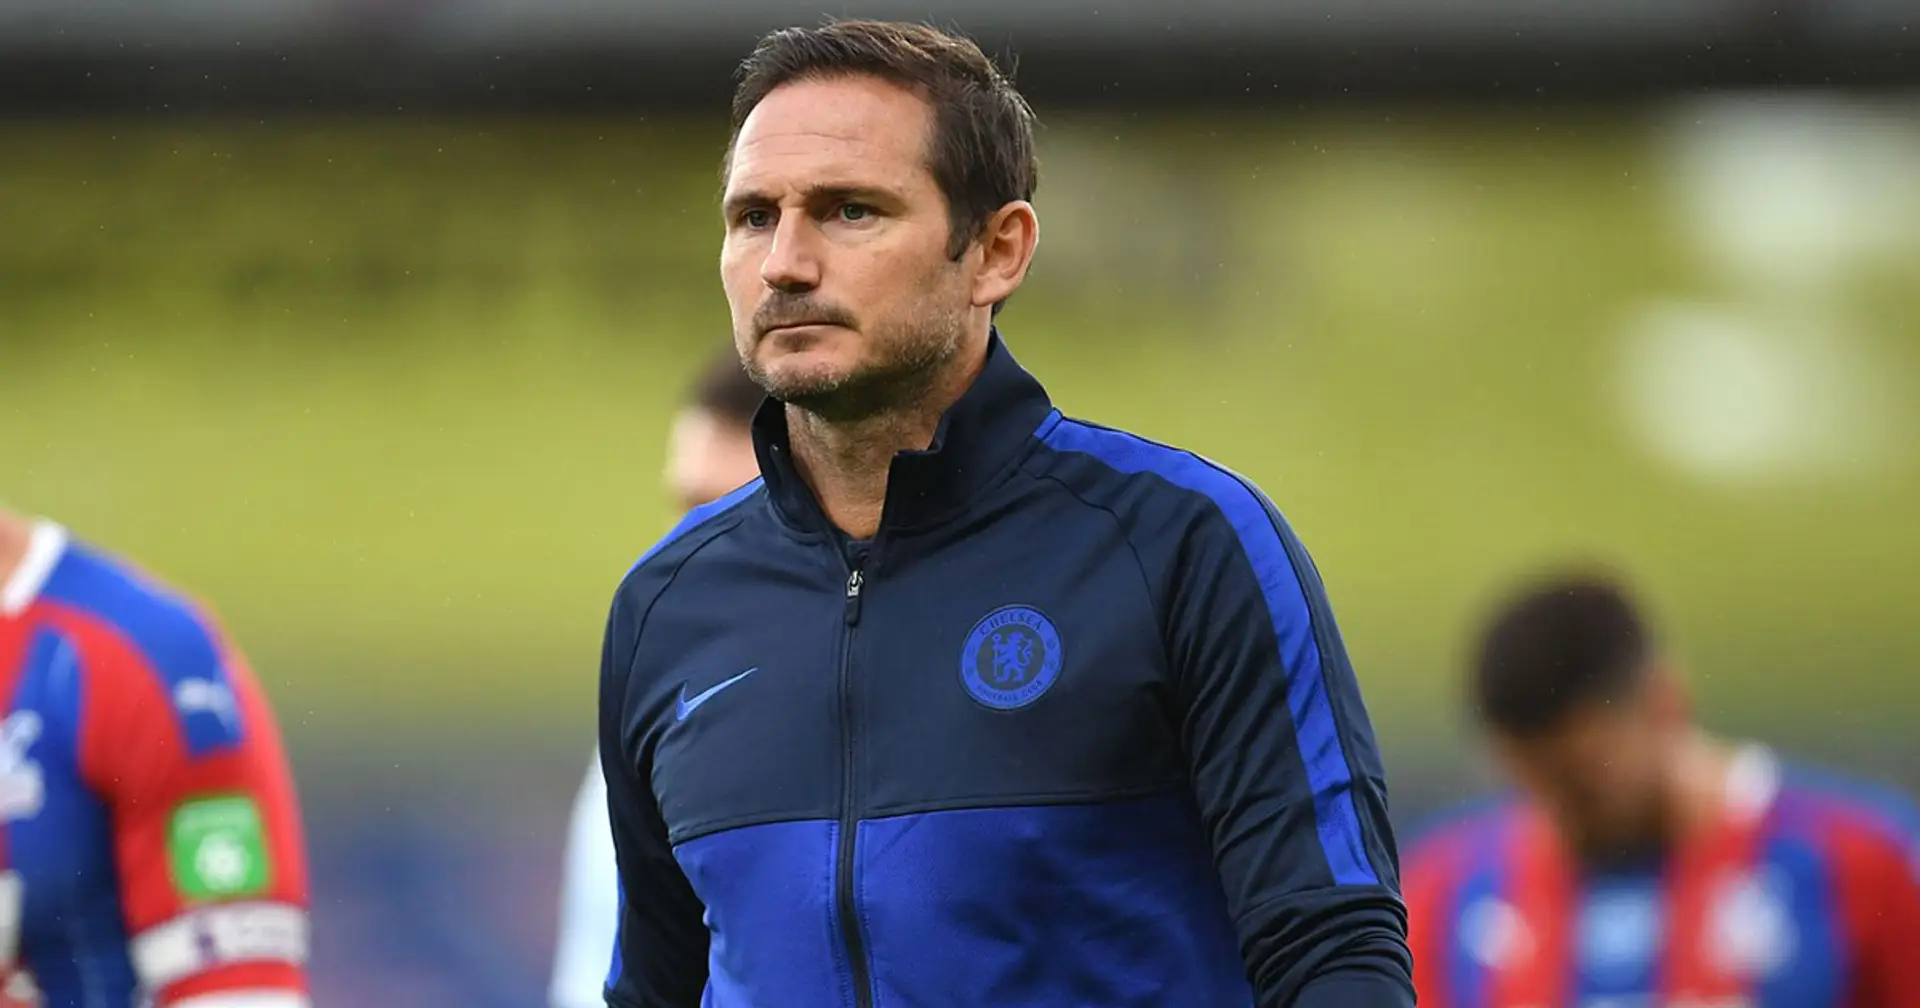 Frank Lampard names his dad's achievement as huge inspiration in FA Cup run-in